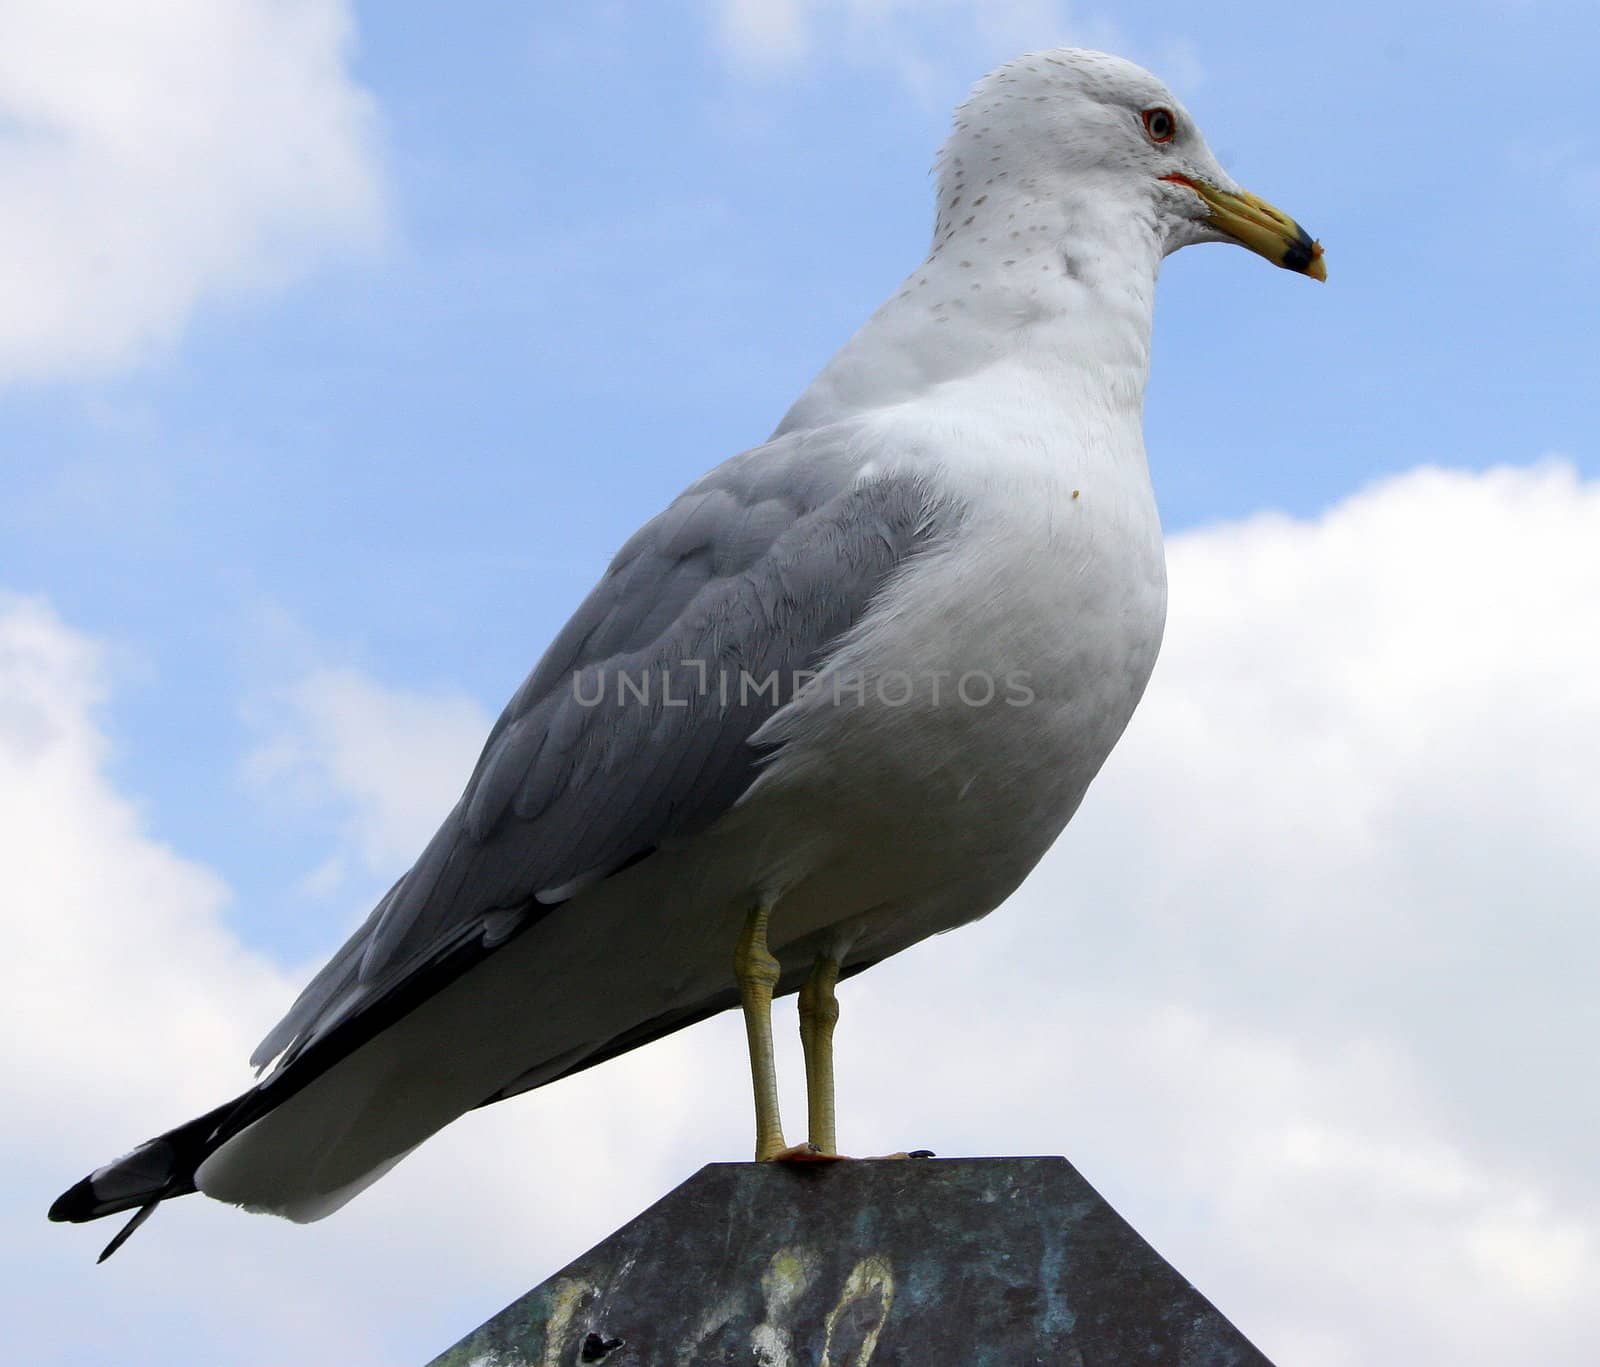 A seagull standing on a rock